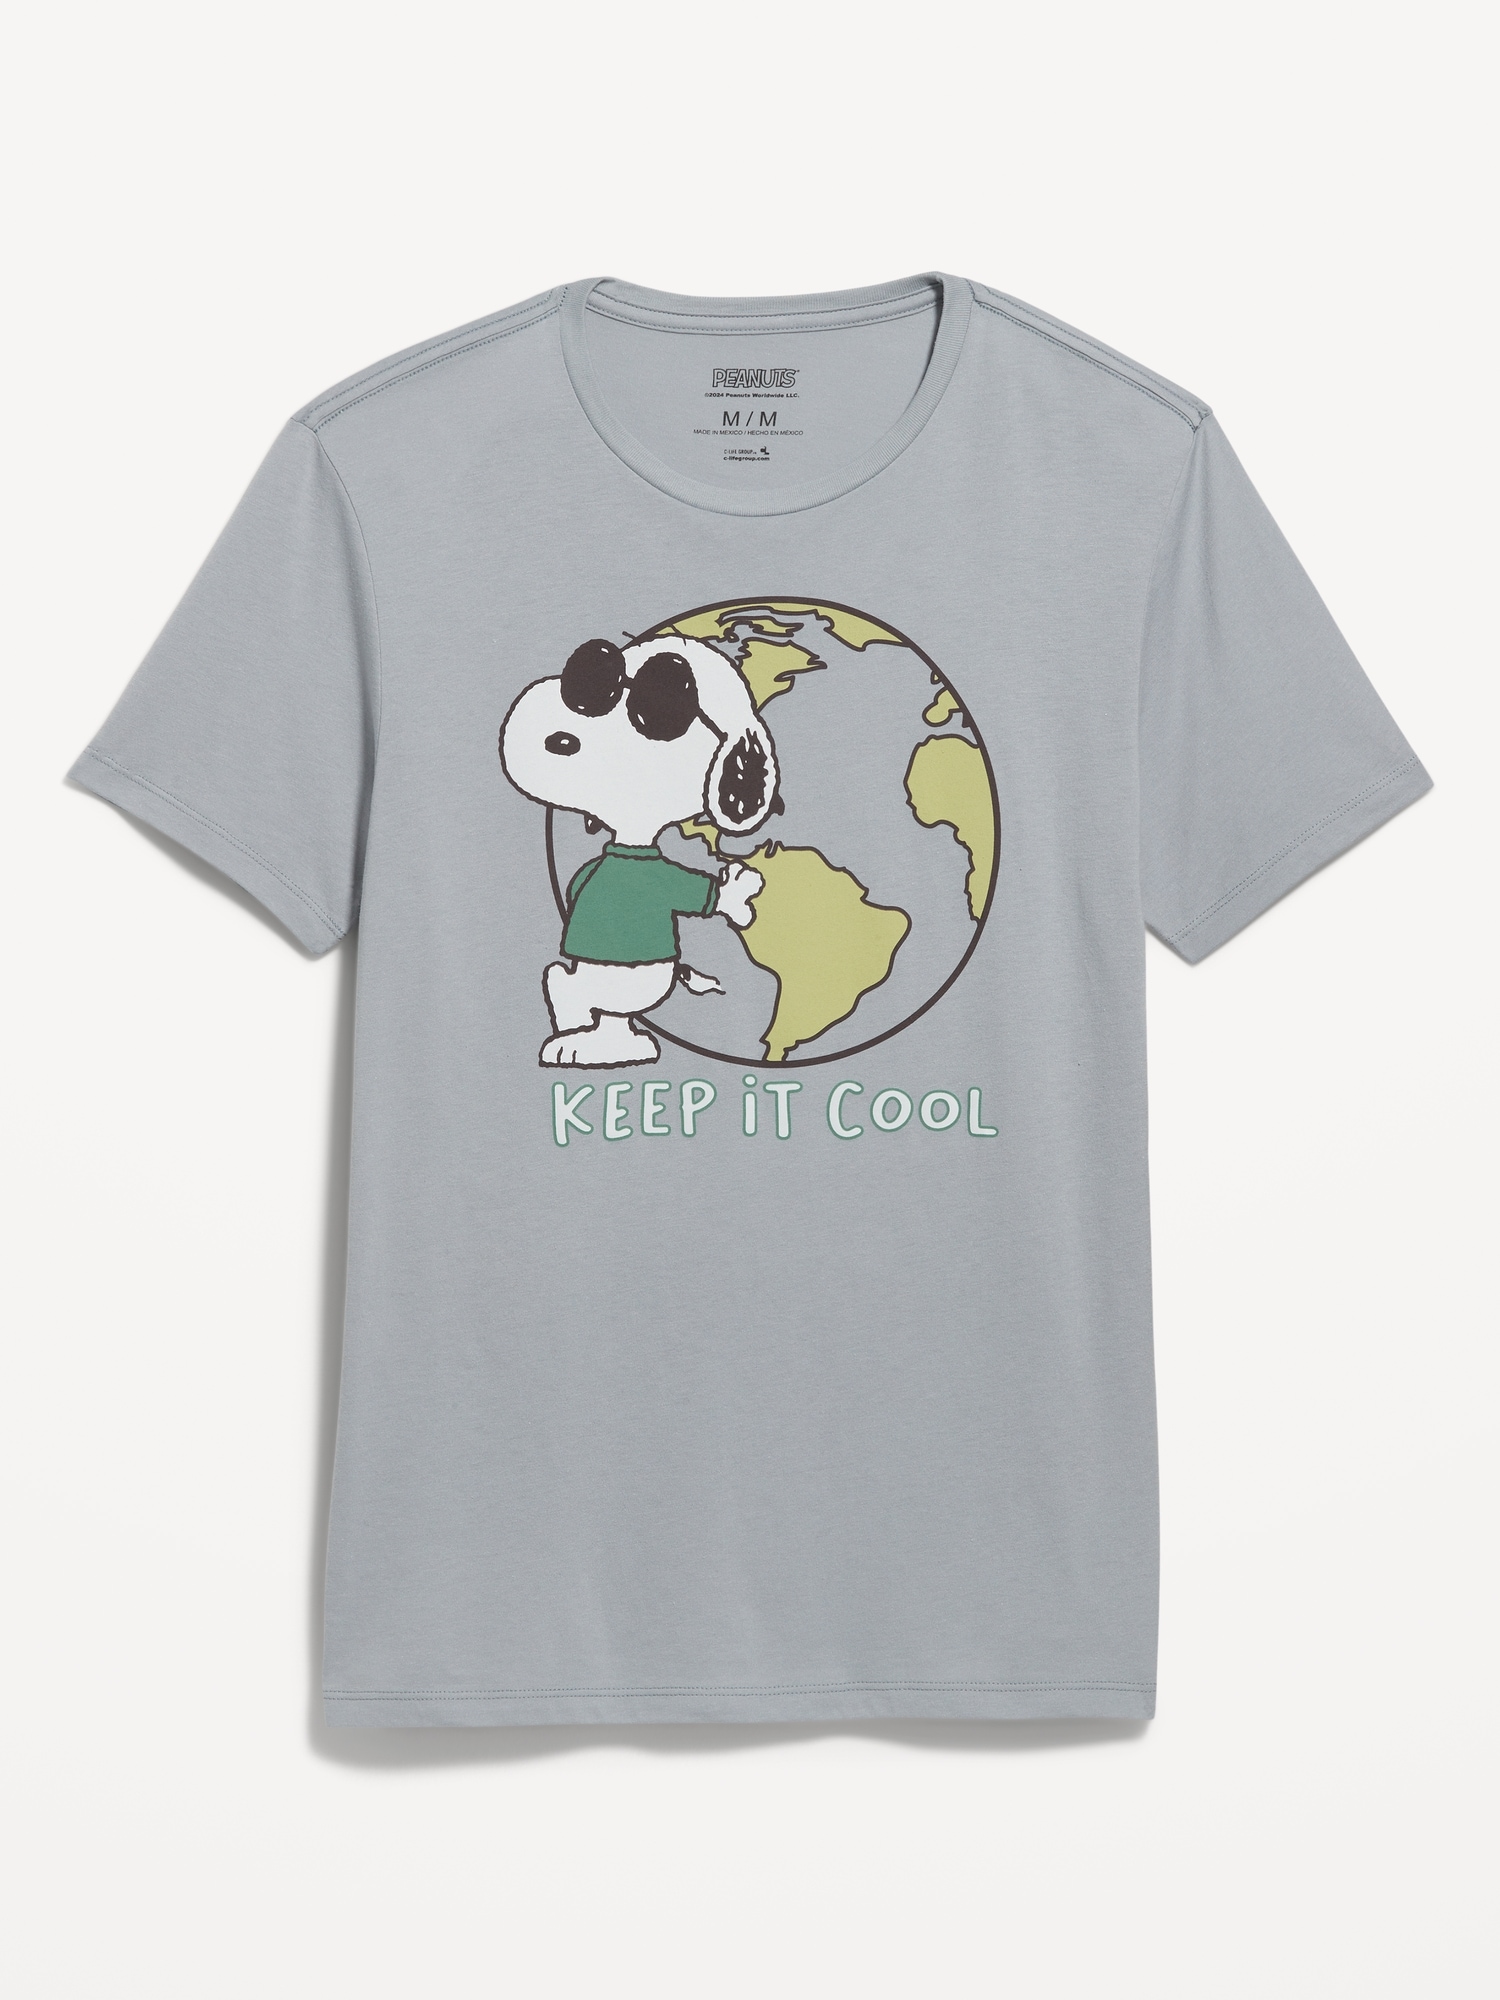 Peanuts™ Snoopy Gender-Neutral T-Shirt for Adults